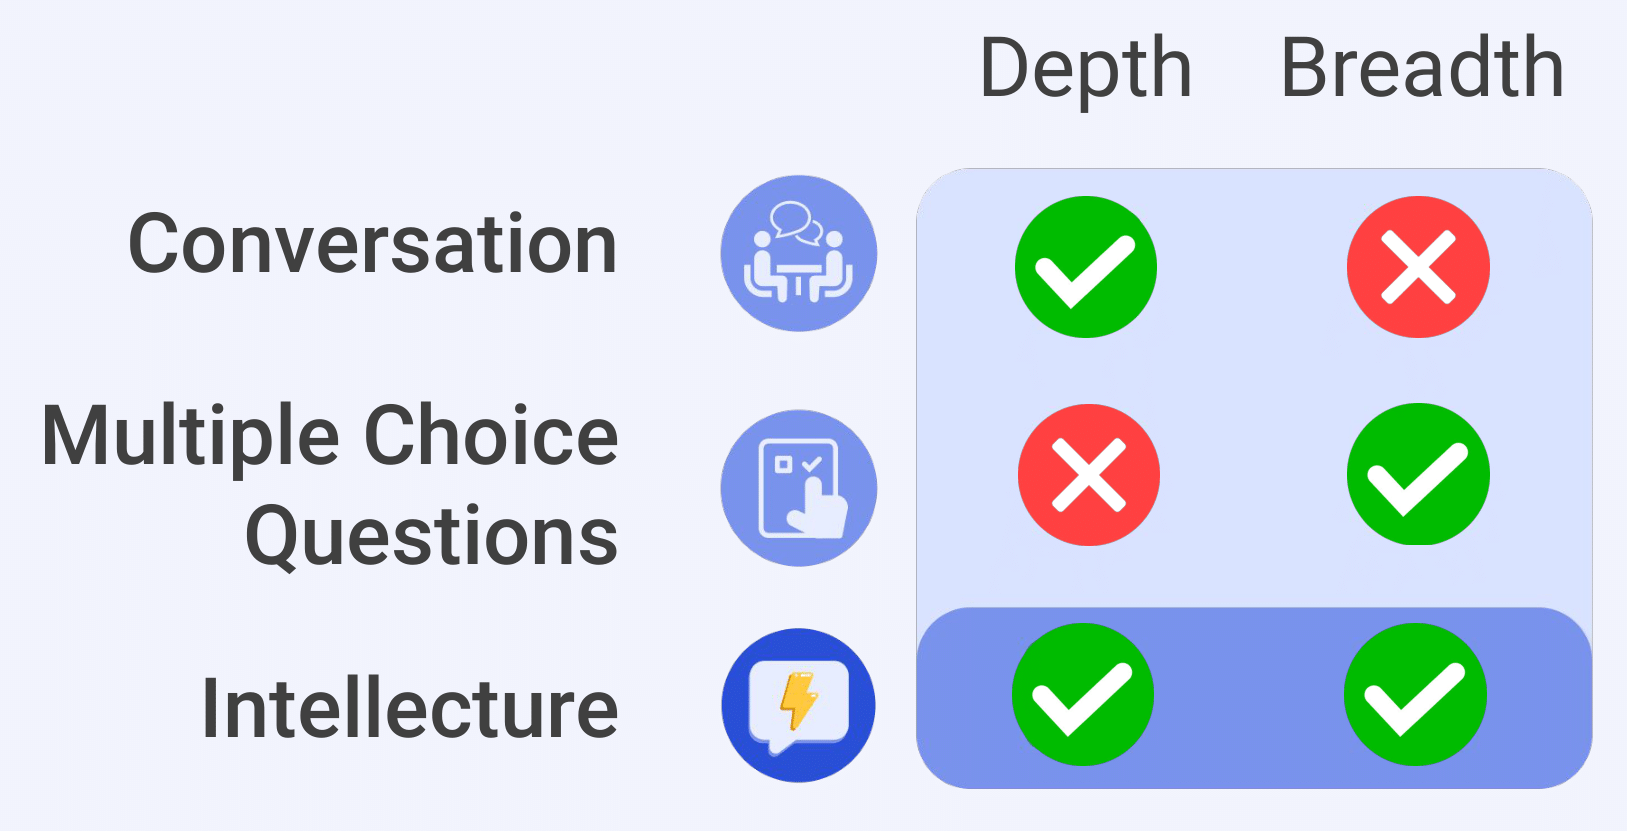 Tooling comparison between 
			conversation, multiple choice questions, and Intellecture